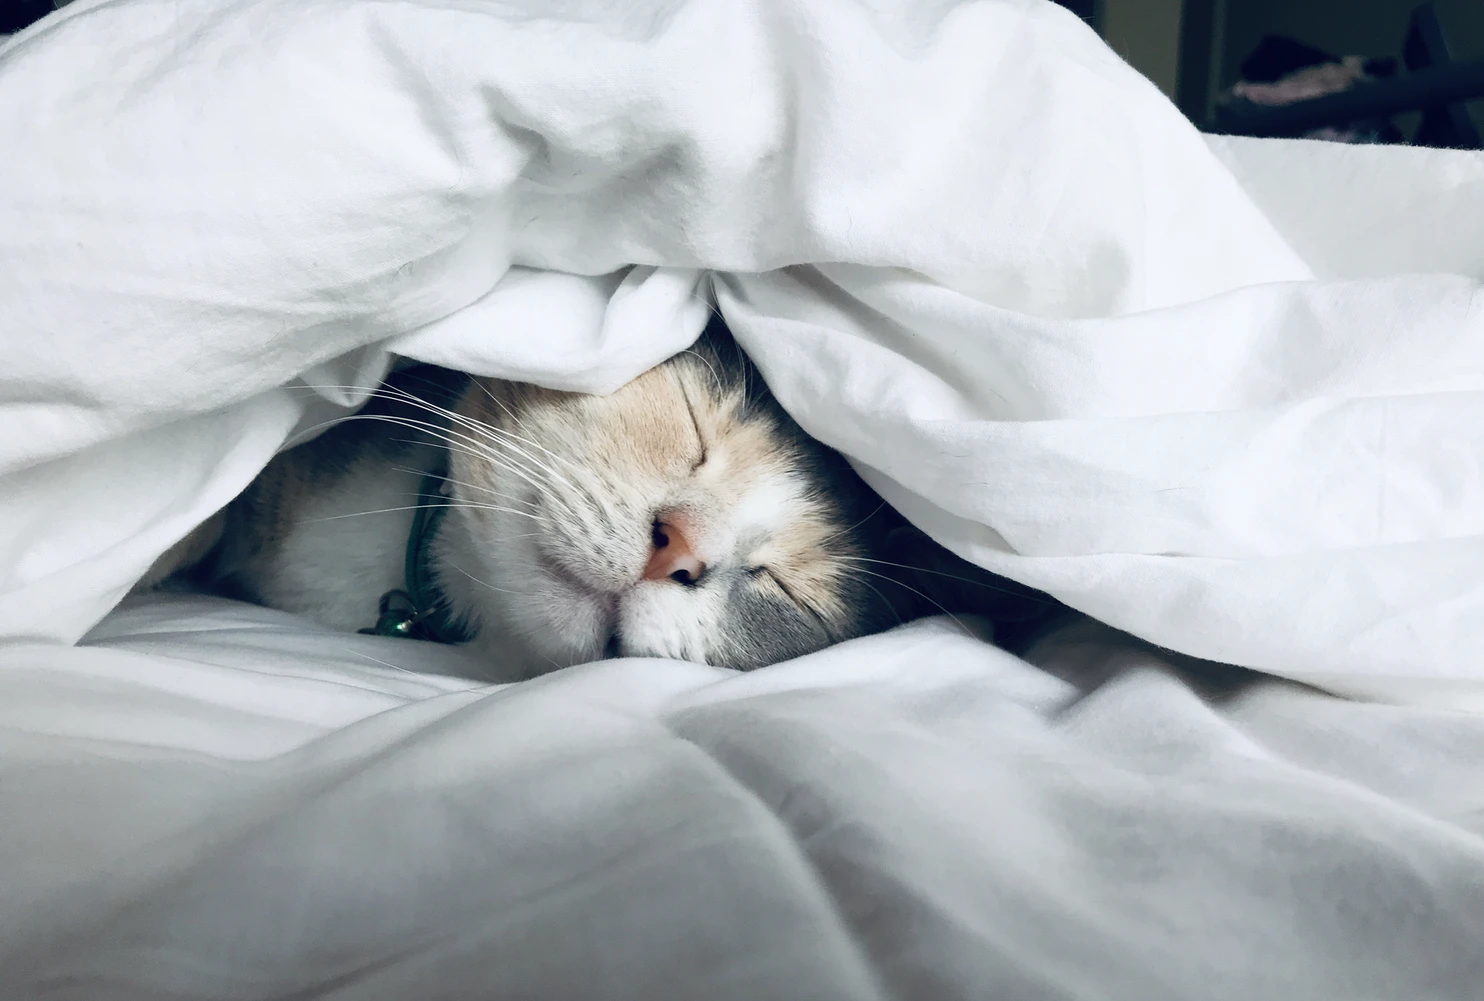 What is a duvet day and how to enjoy it